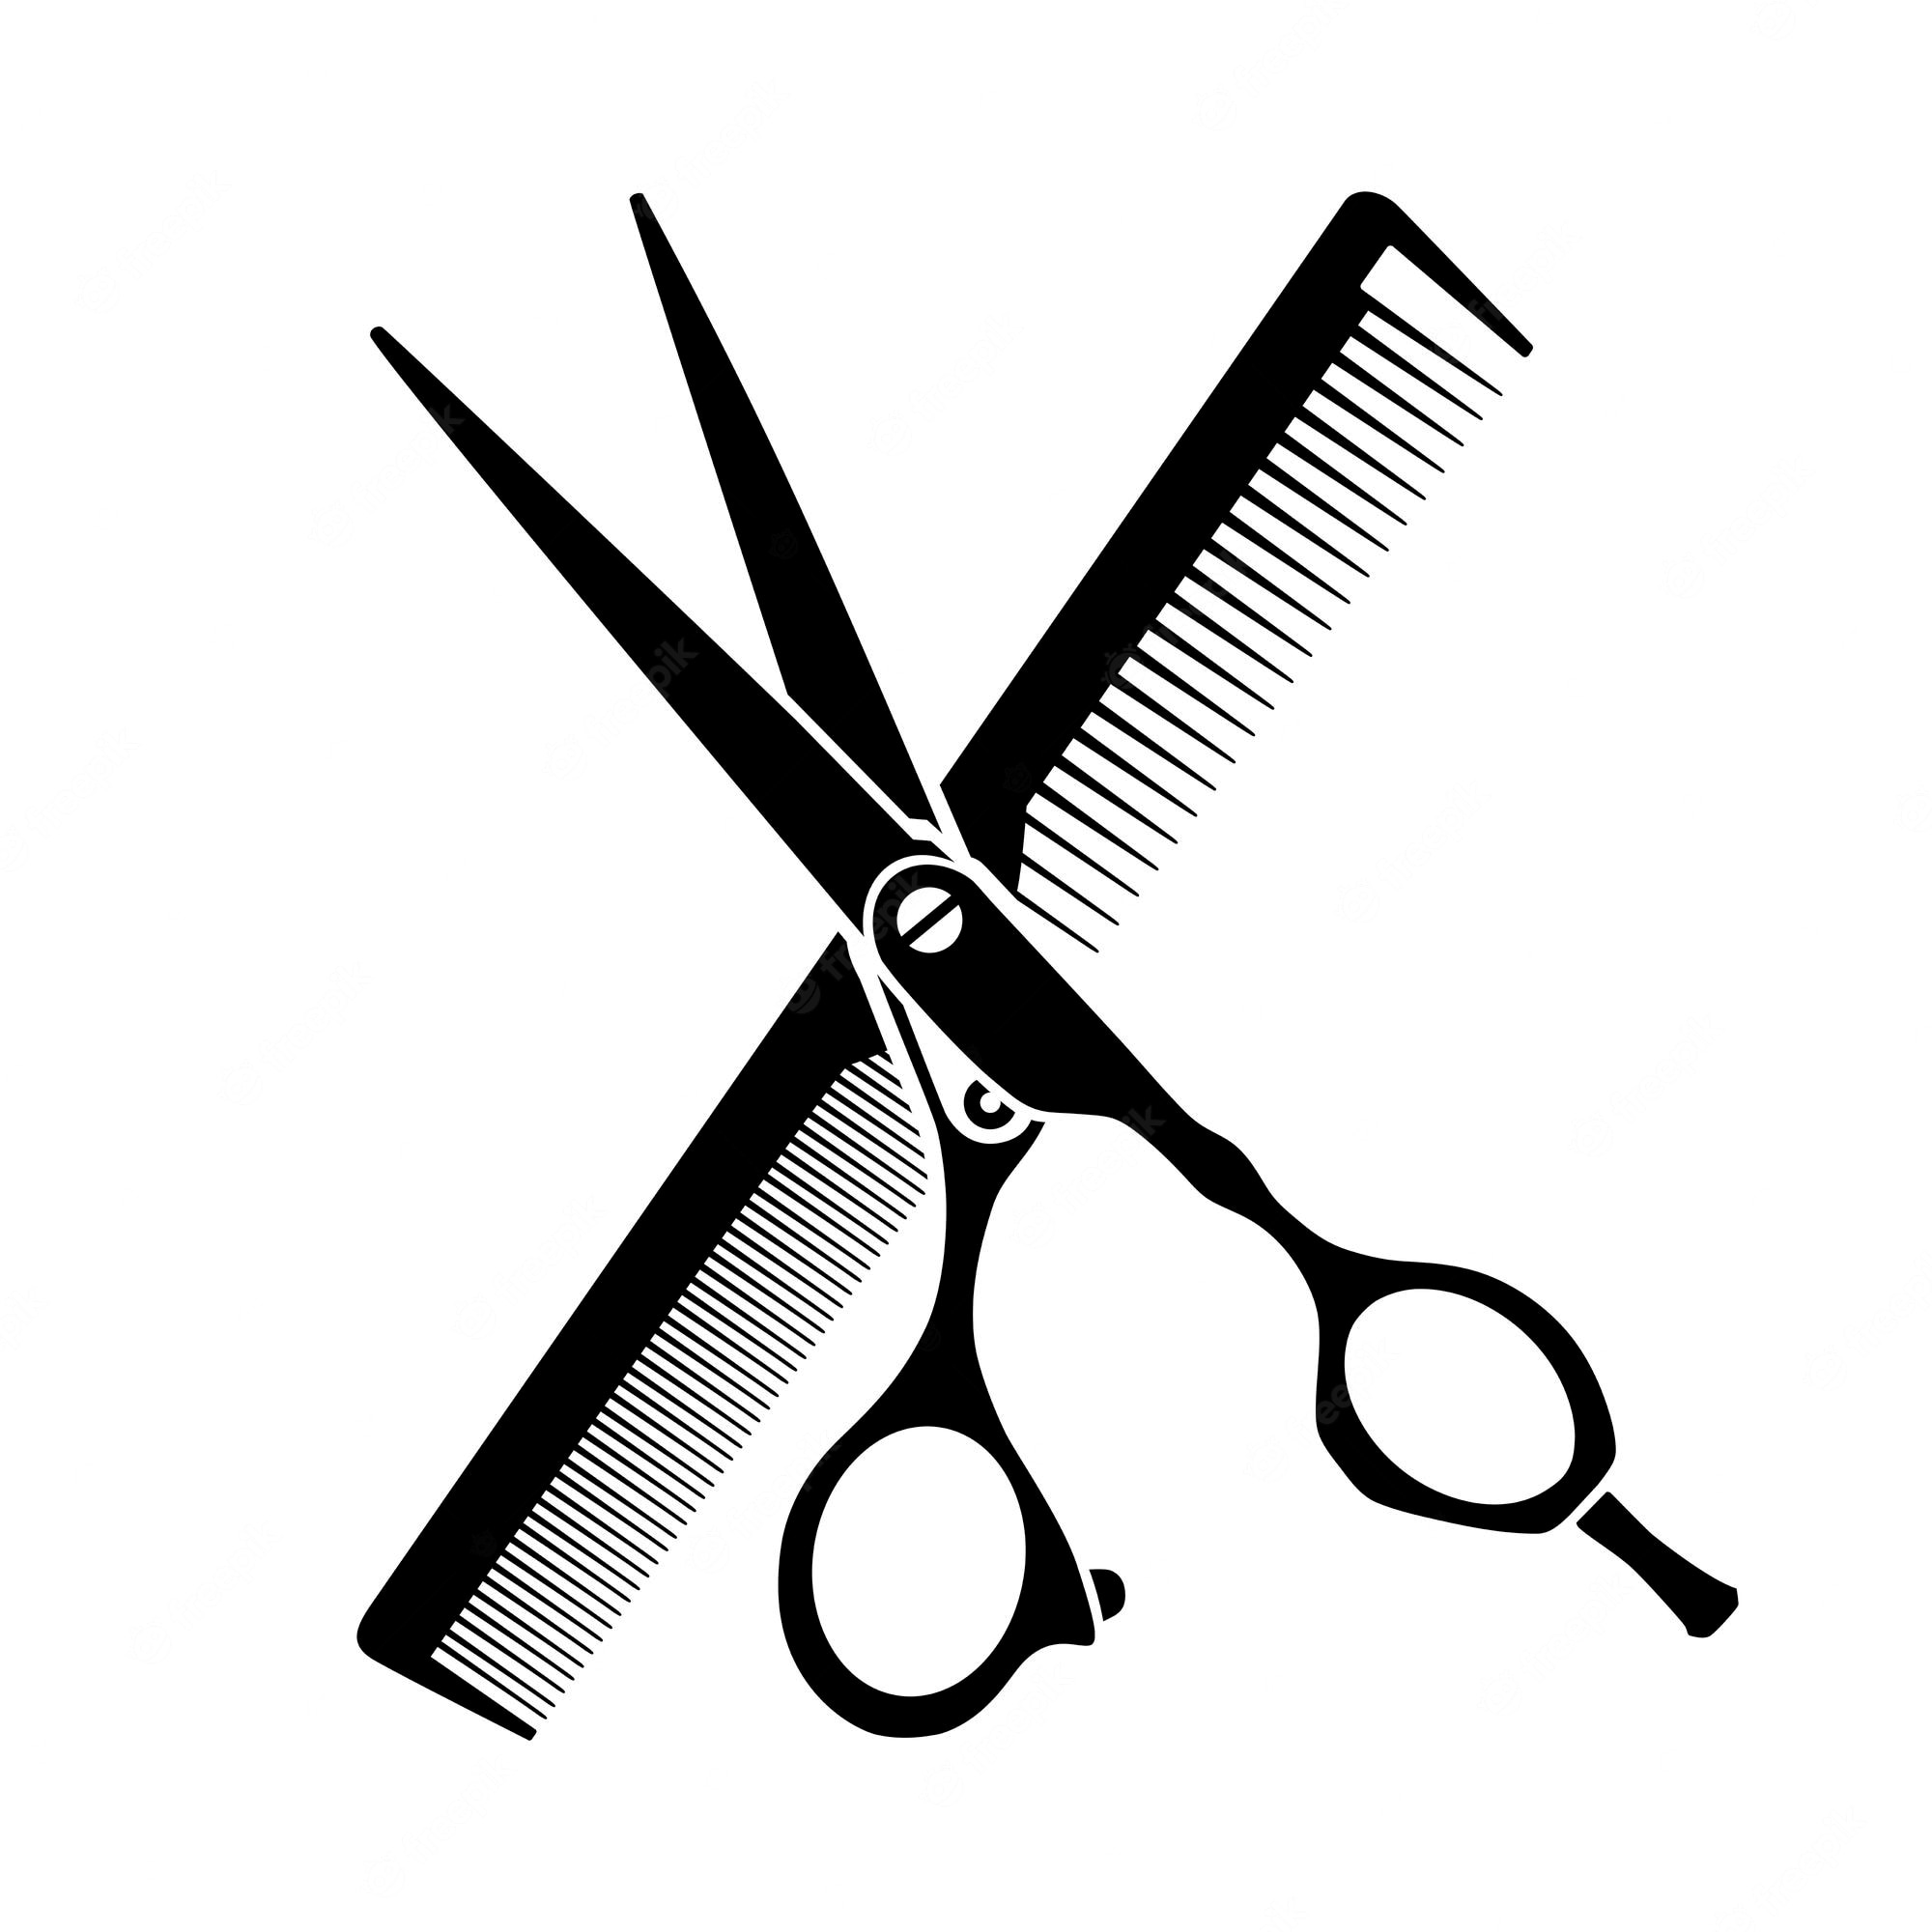 Haircutting Scissors Stock Illustrations, Royalty-Free Vector - Clip ...